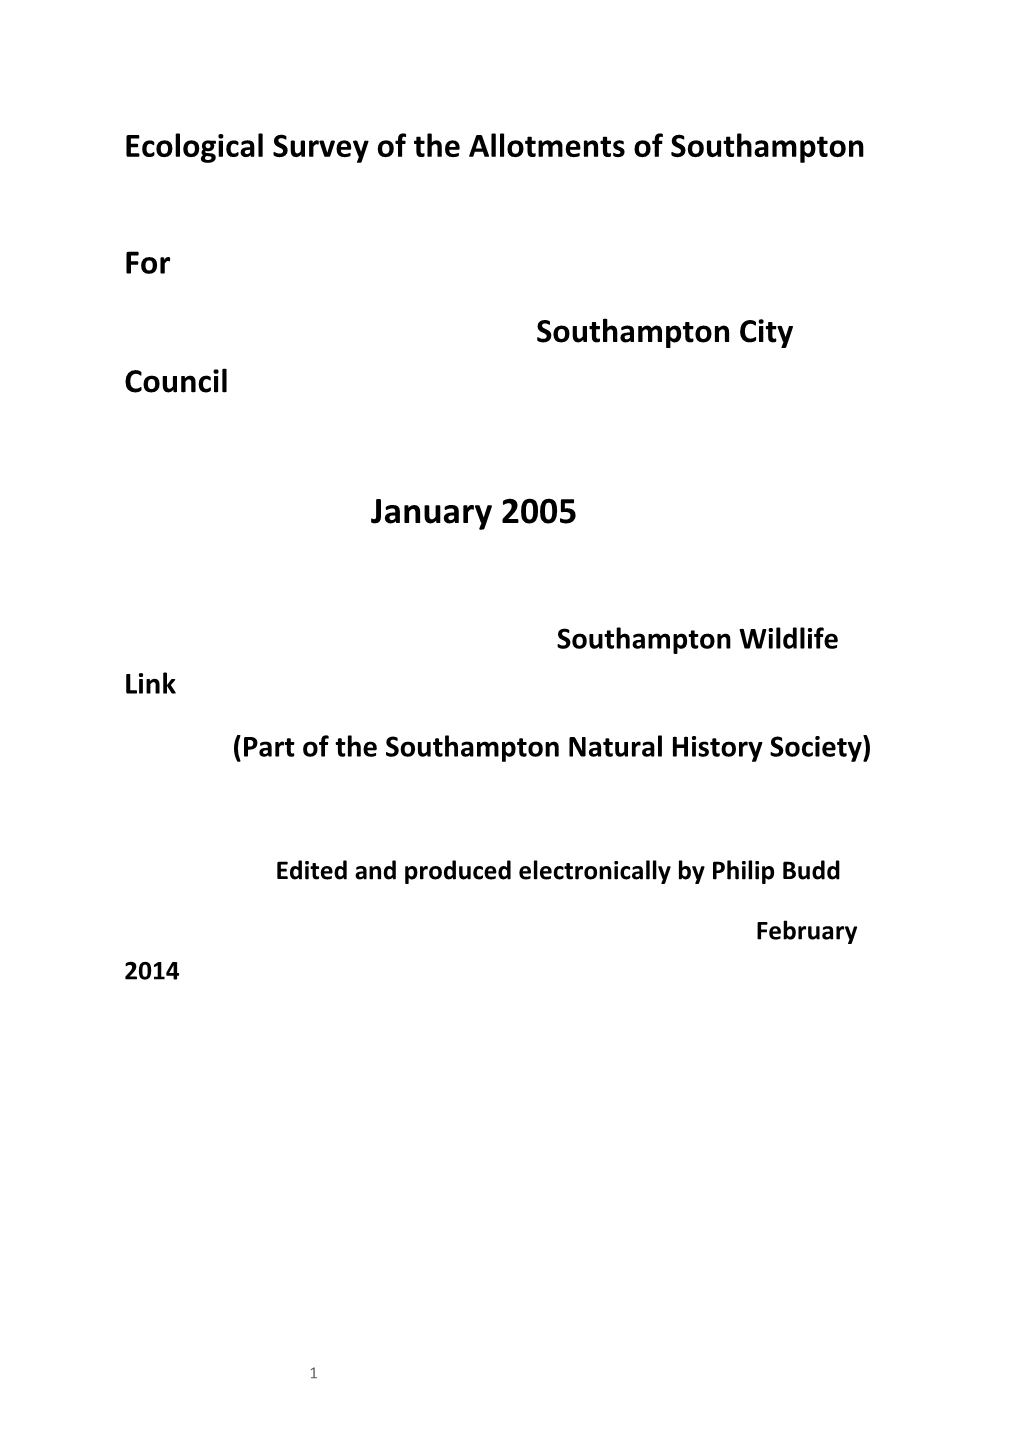 Ecological Survey of the Allotments of Southampton